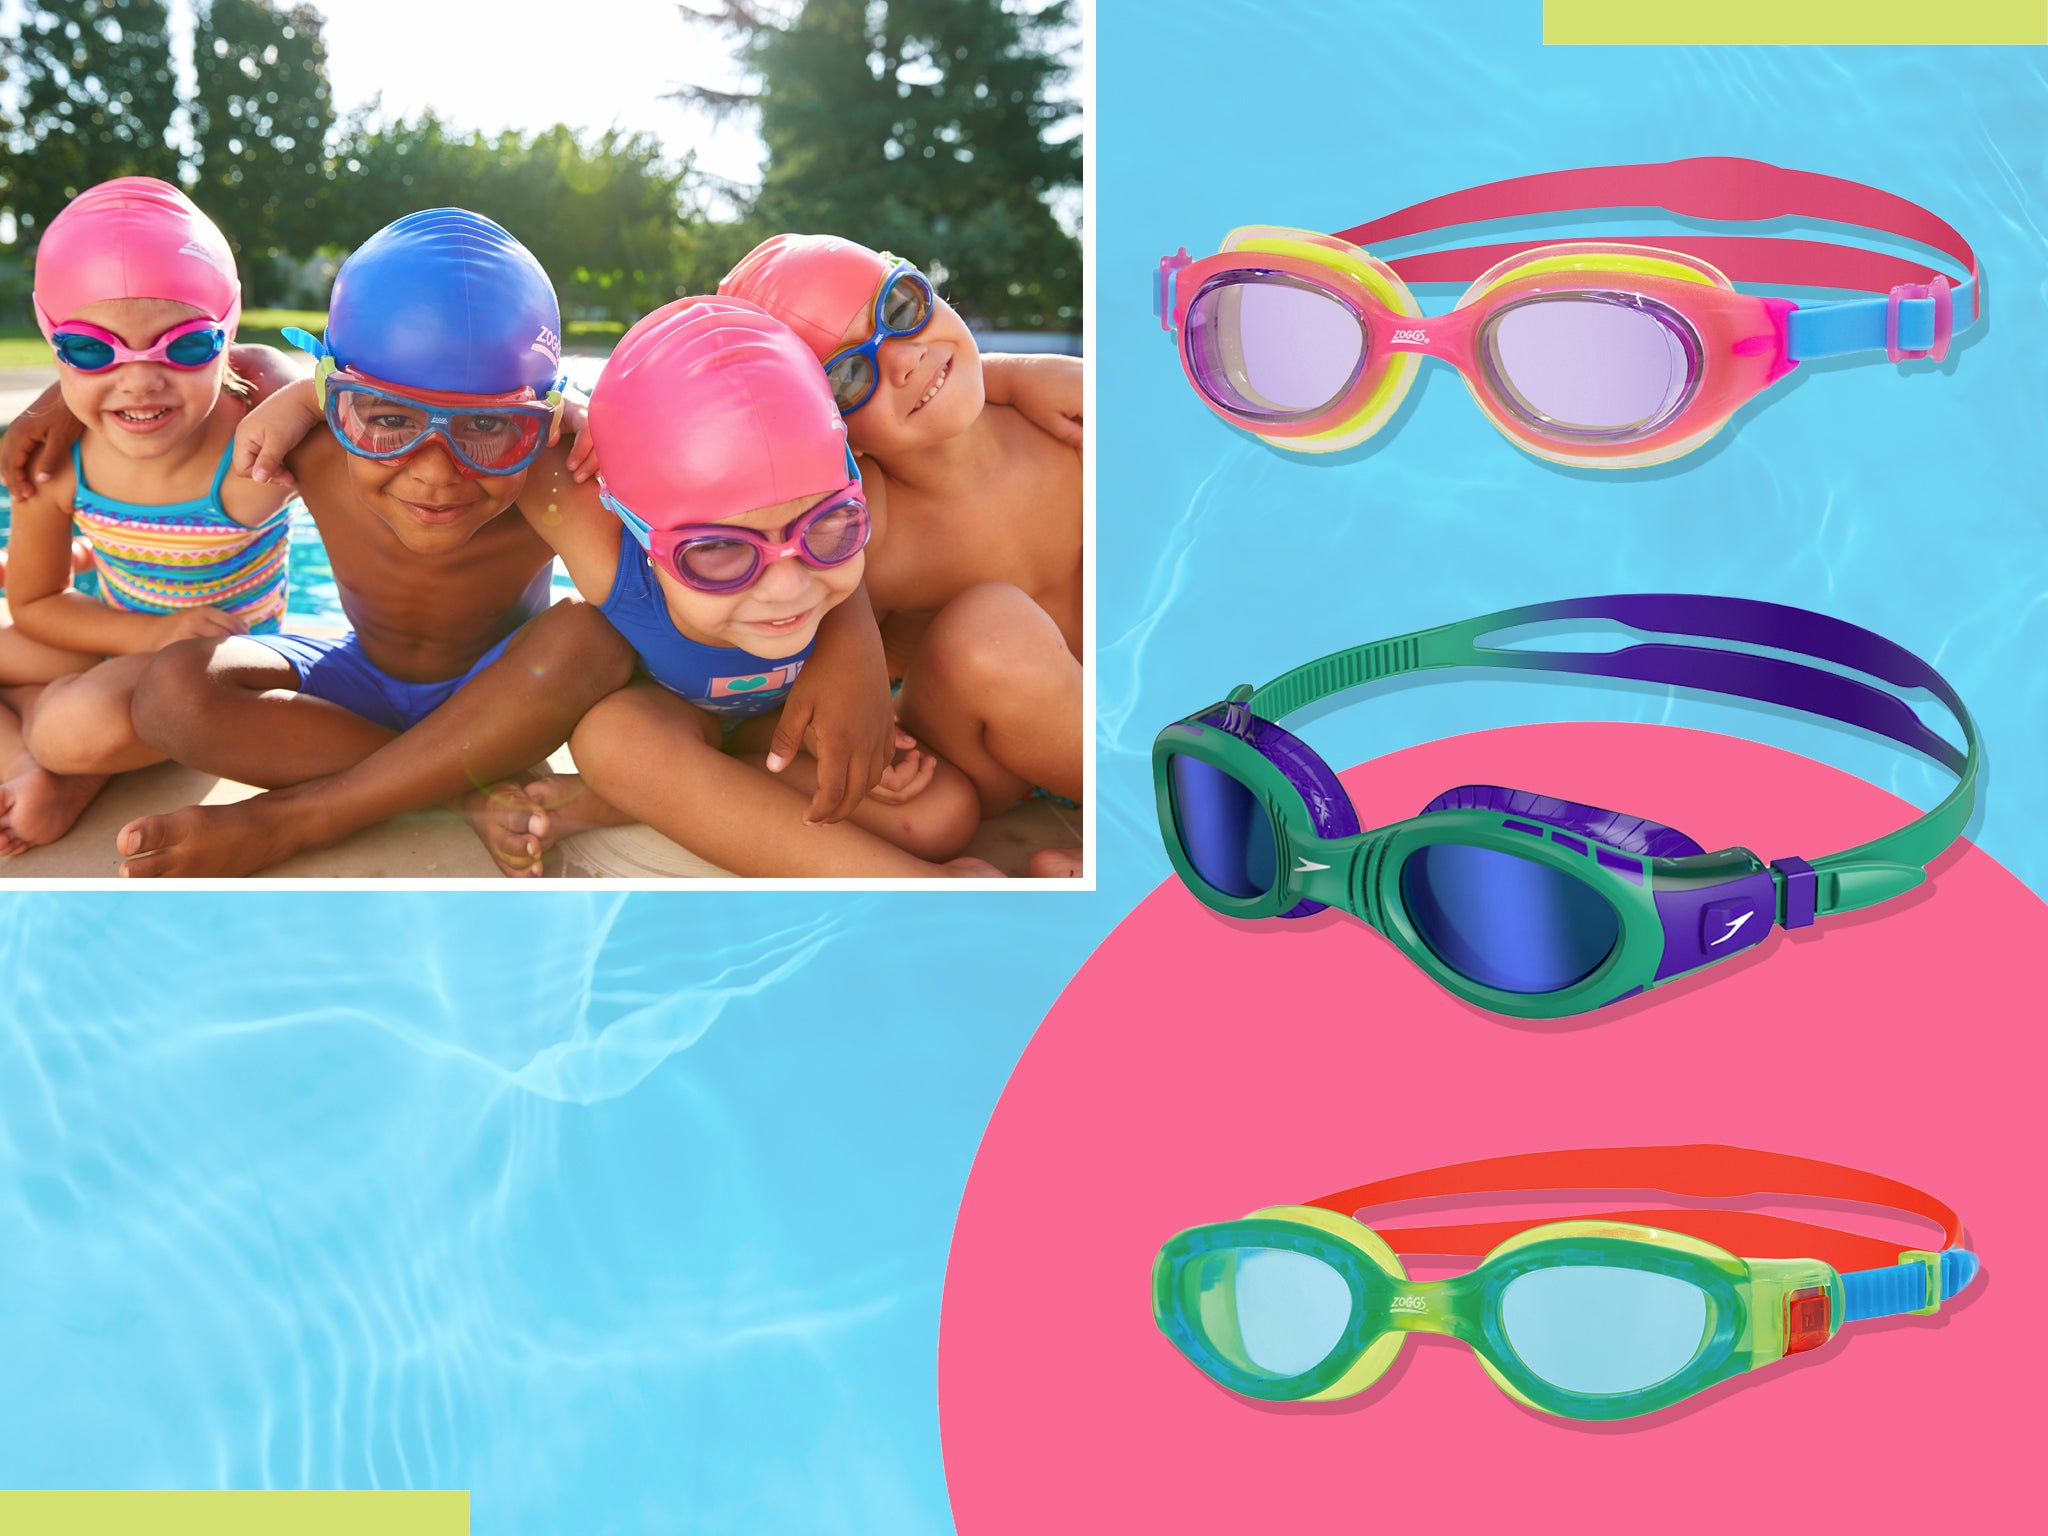 Blue Kids Child Swimming Pool Goggles Mask Lot of 2